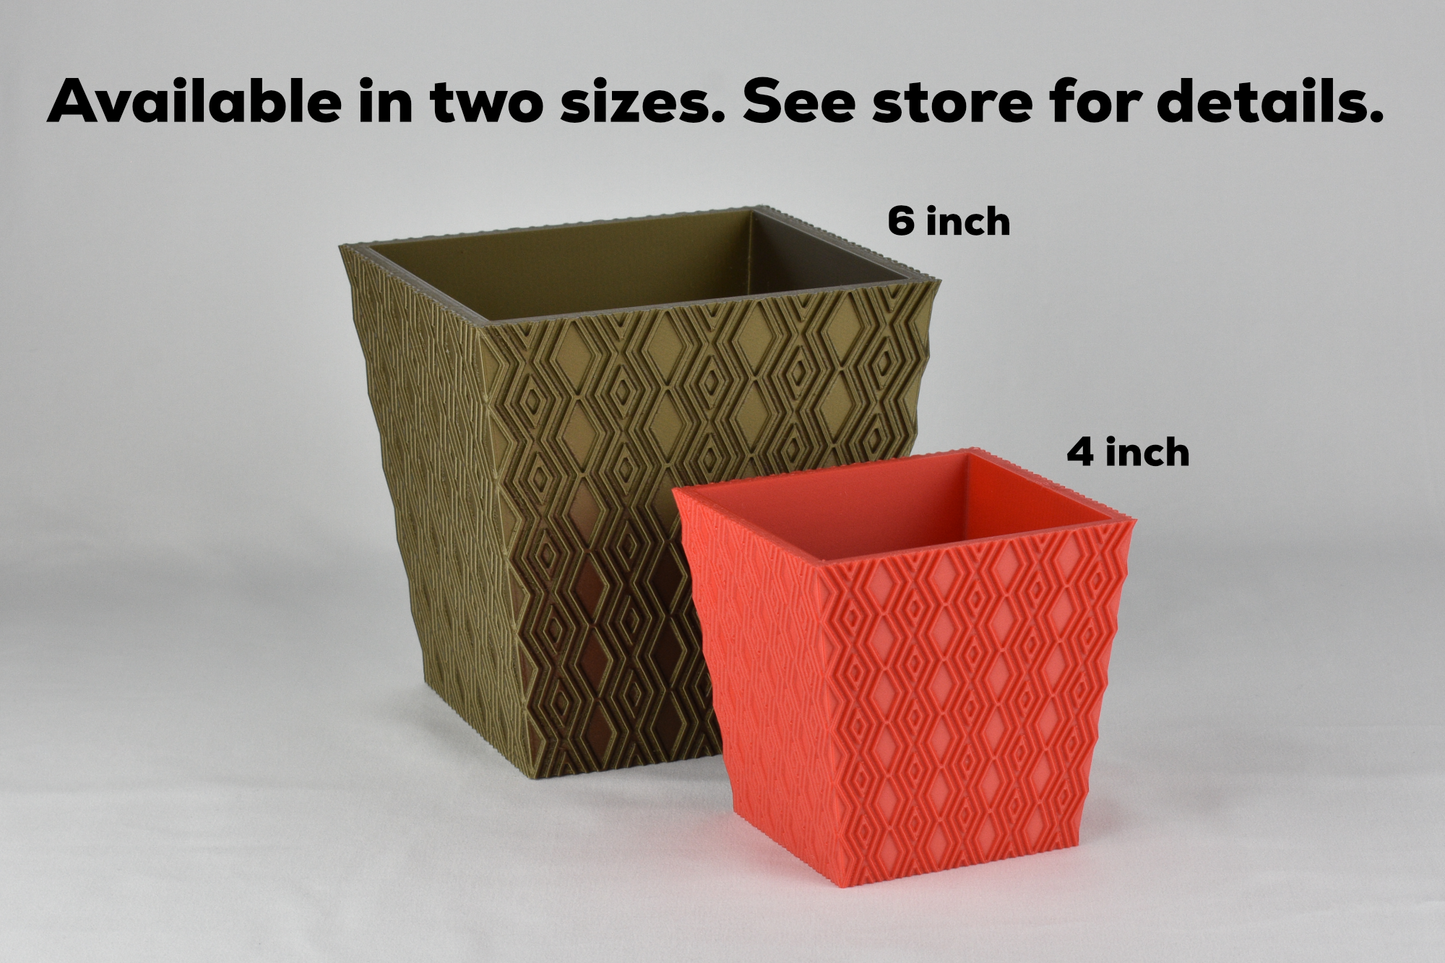 6-inch Square Planter, Geometric Pattern #4, Drainage & Optional Saucer, Outdoor Safe Flower Pot, 30+ Colors